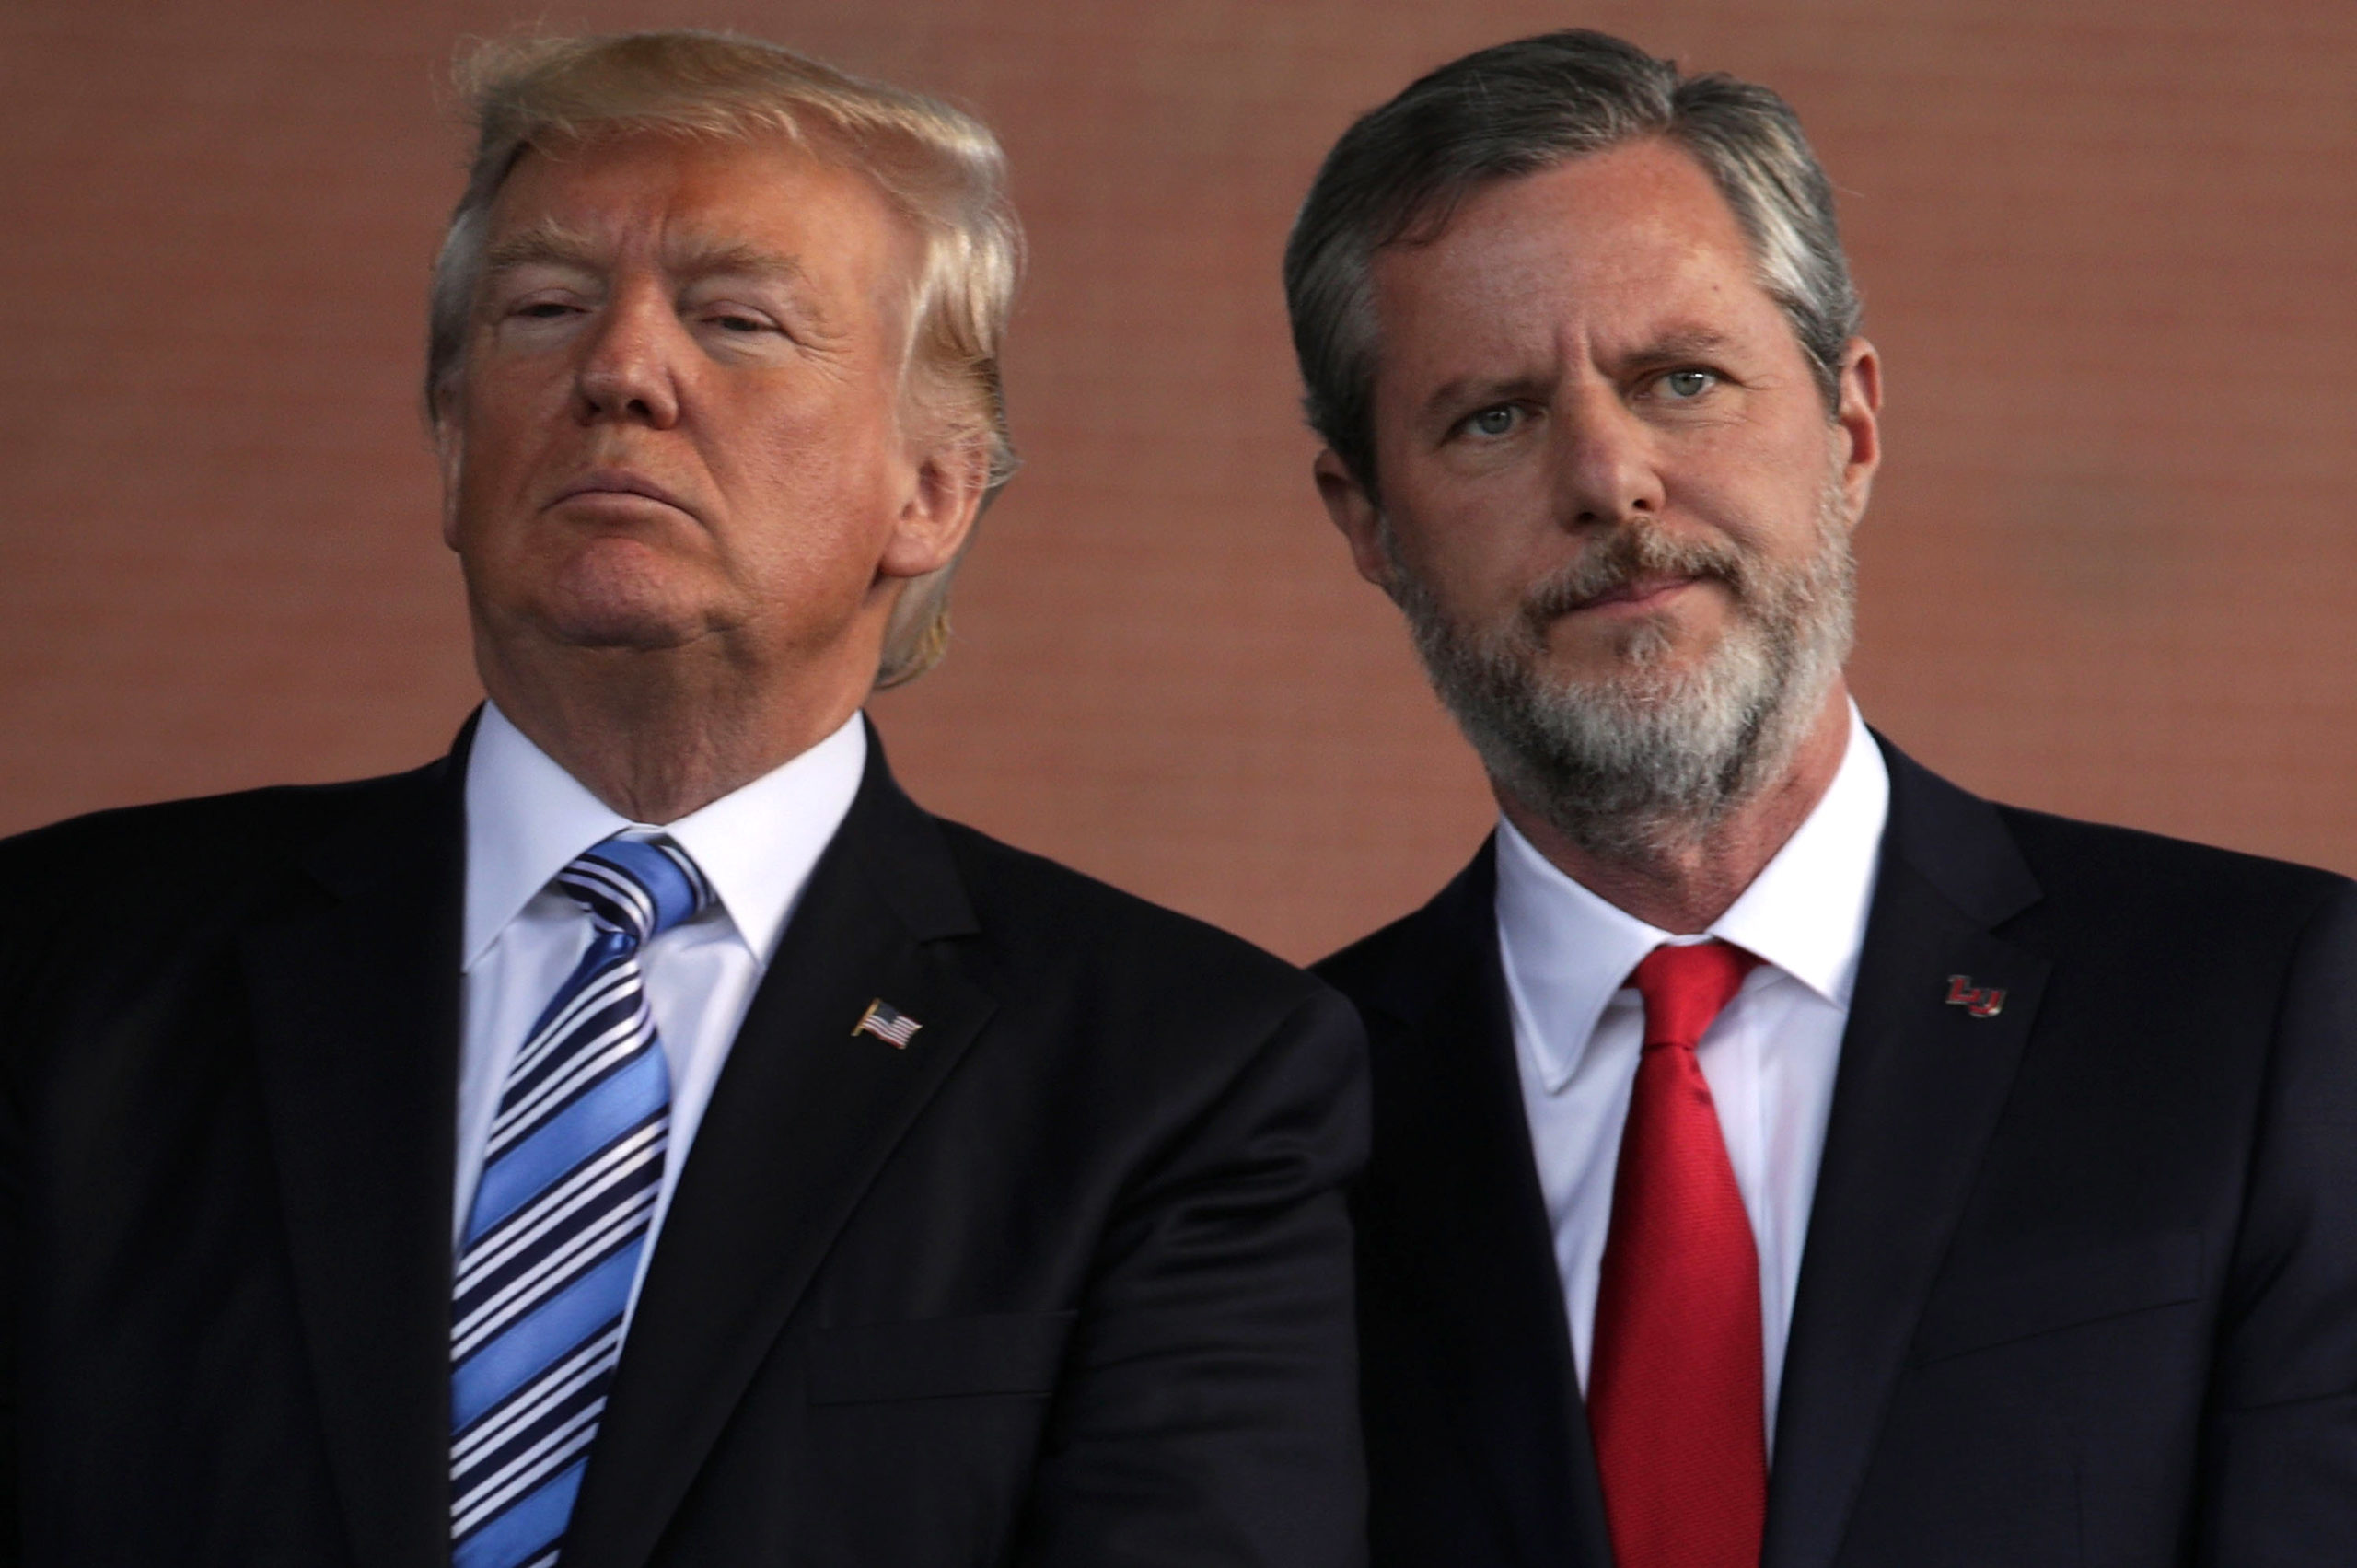 Jerry Falwell Jr Uni boss enjoyed watching wife have sex with pool